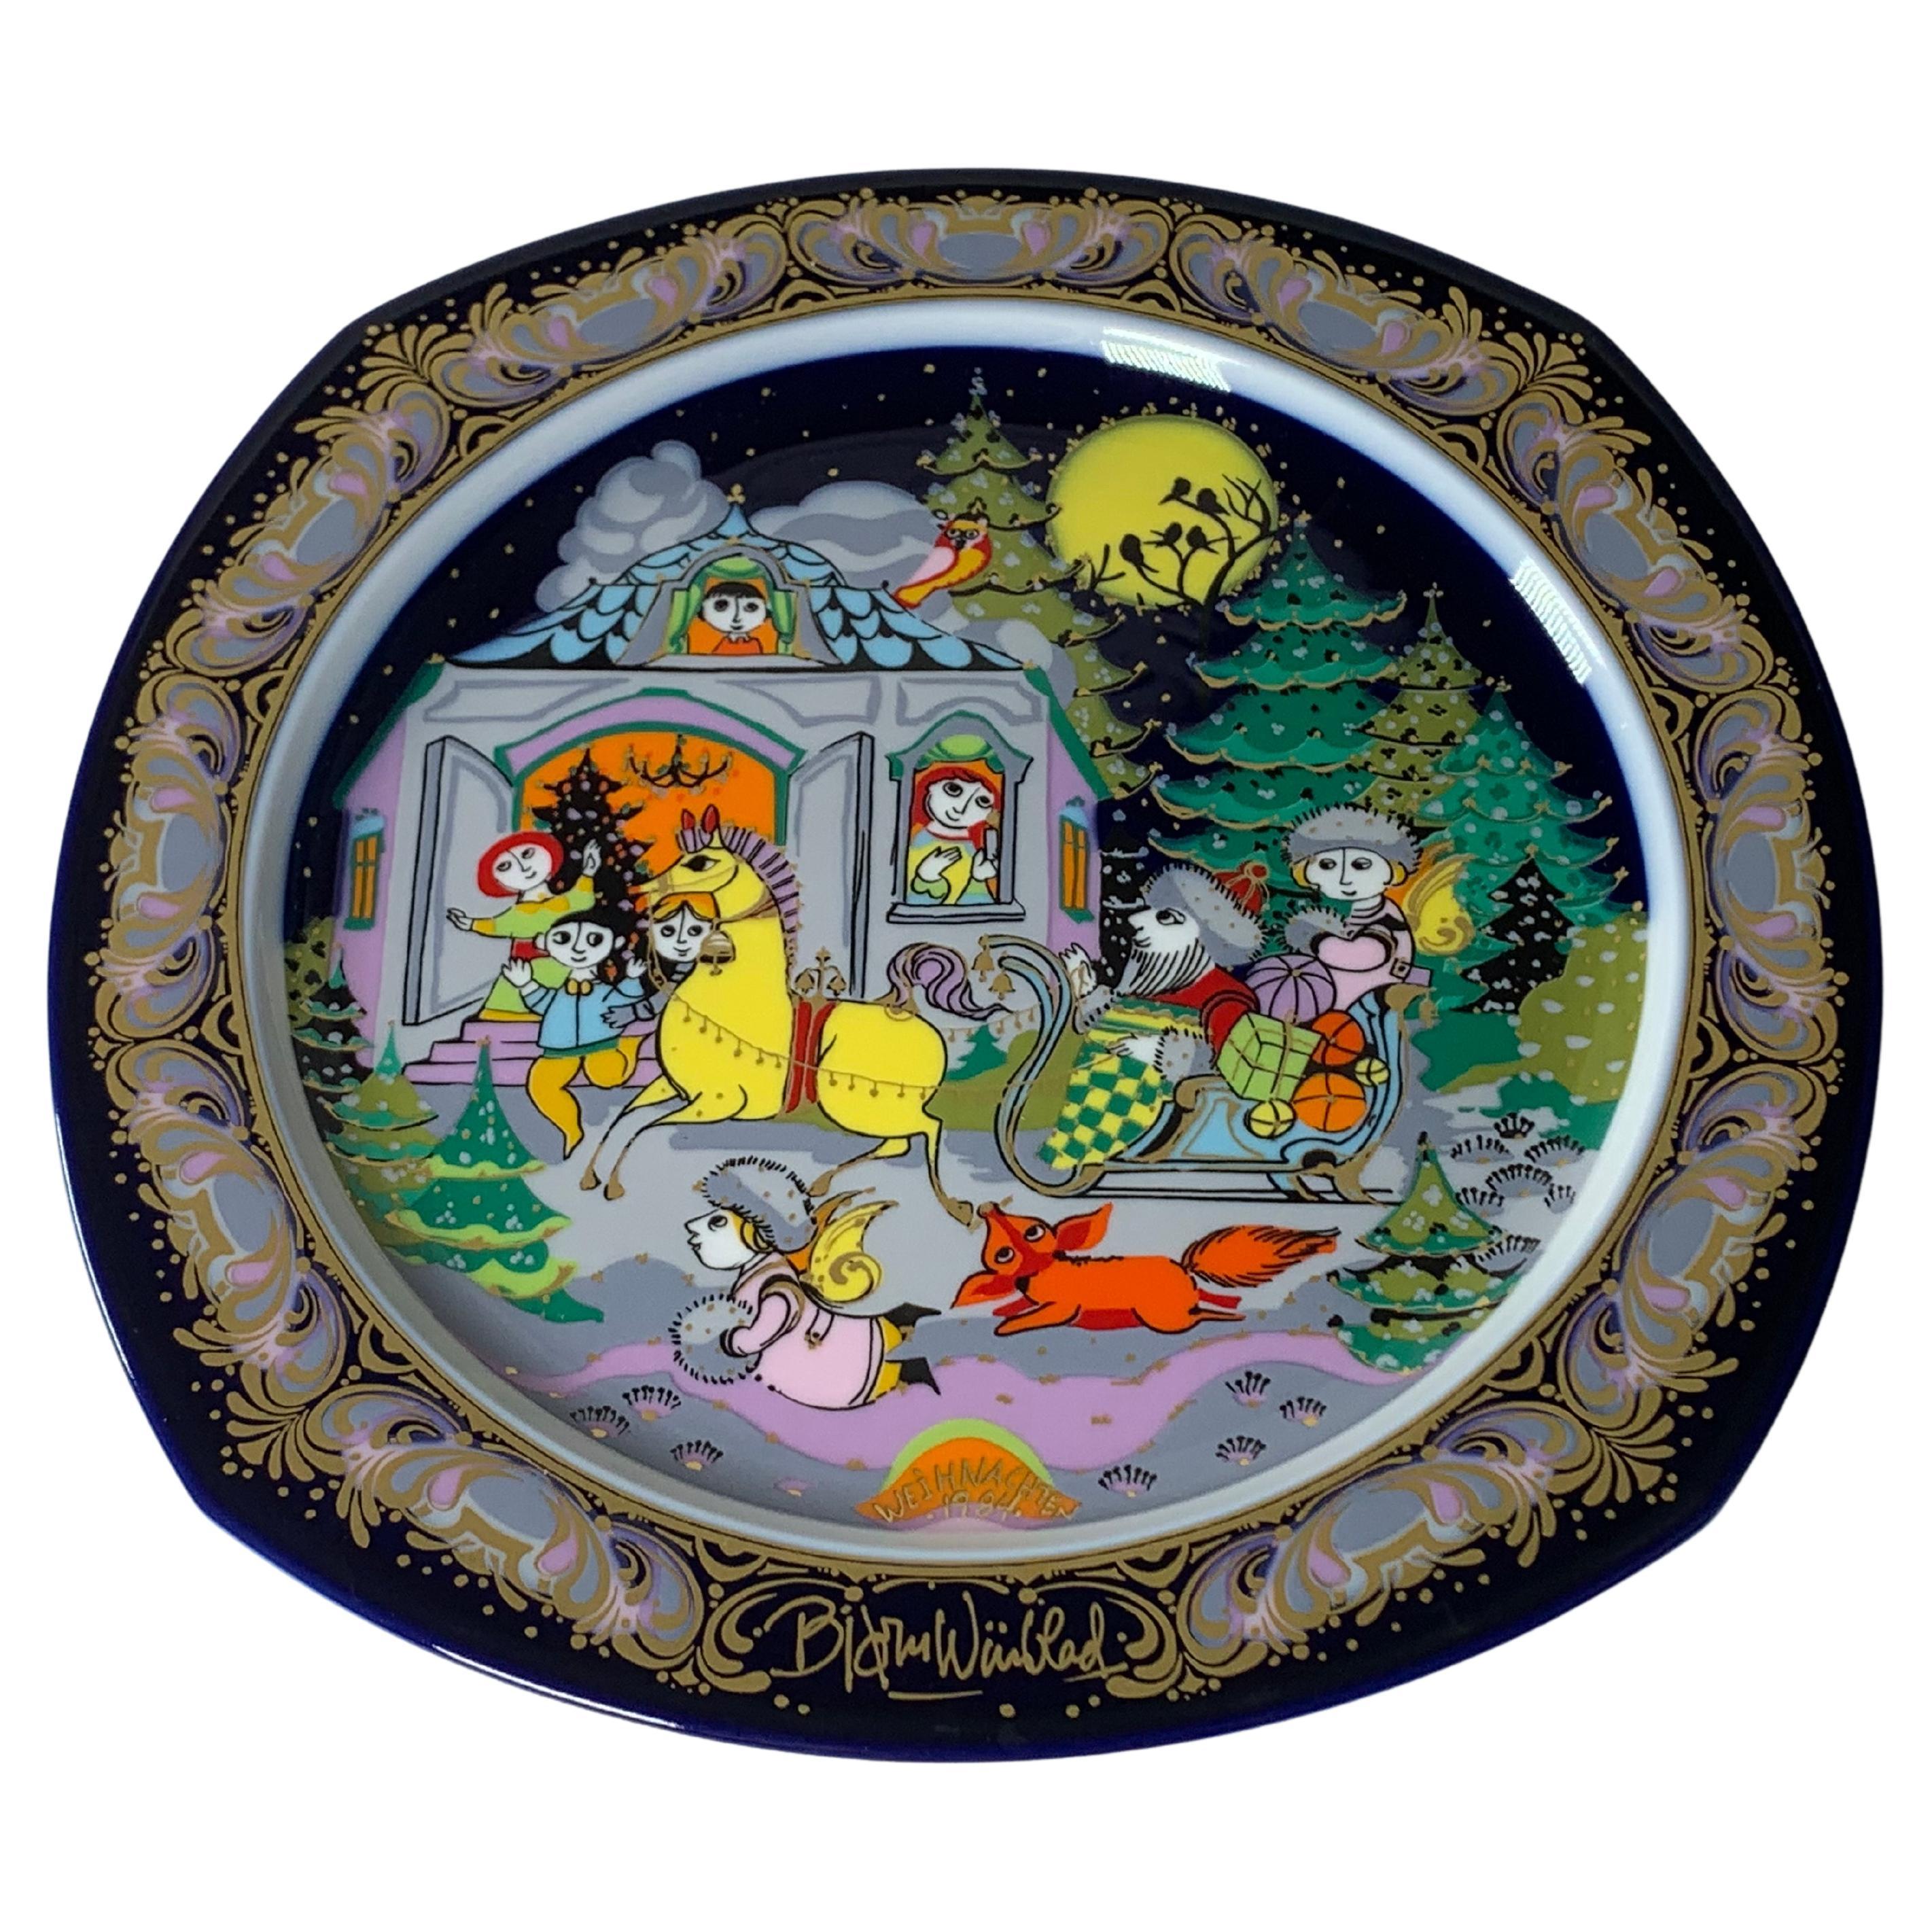 Christmas Songs Plate by Bjorn Wiinblad for Rosenthal from 1984